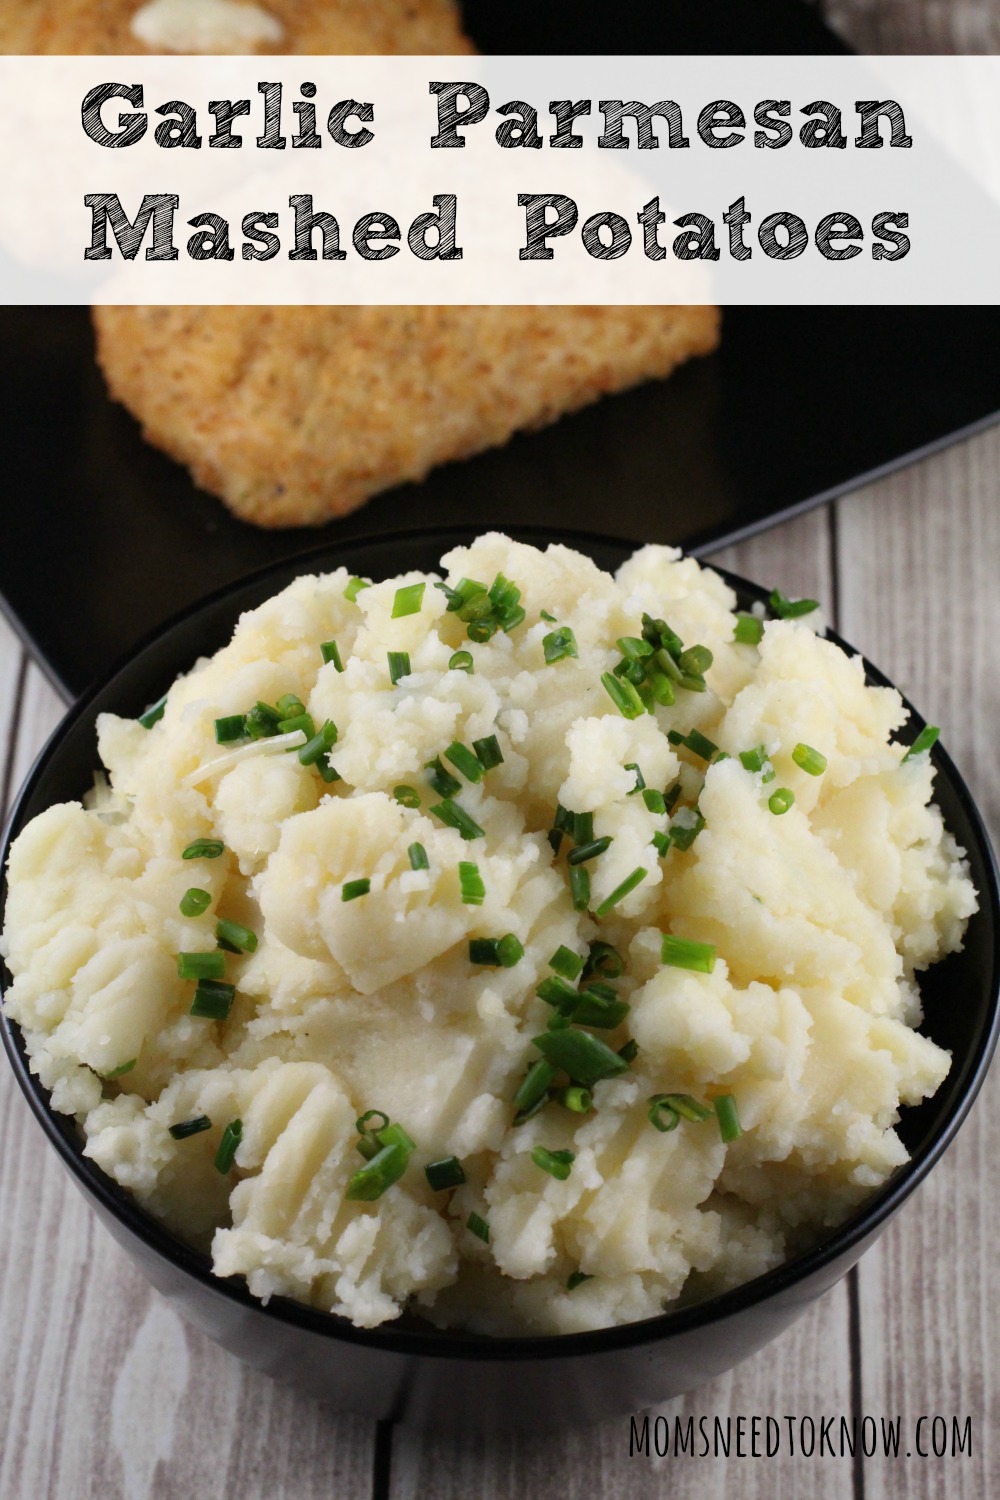 Need a quick side dish on those crazy nights? Try these garlic Parmesan mashed potatoes. Made with instant potatoes, they can be on the table in 5 minutes!